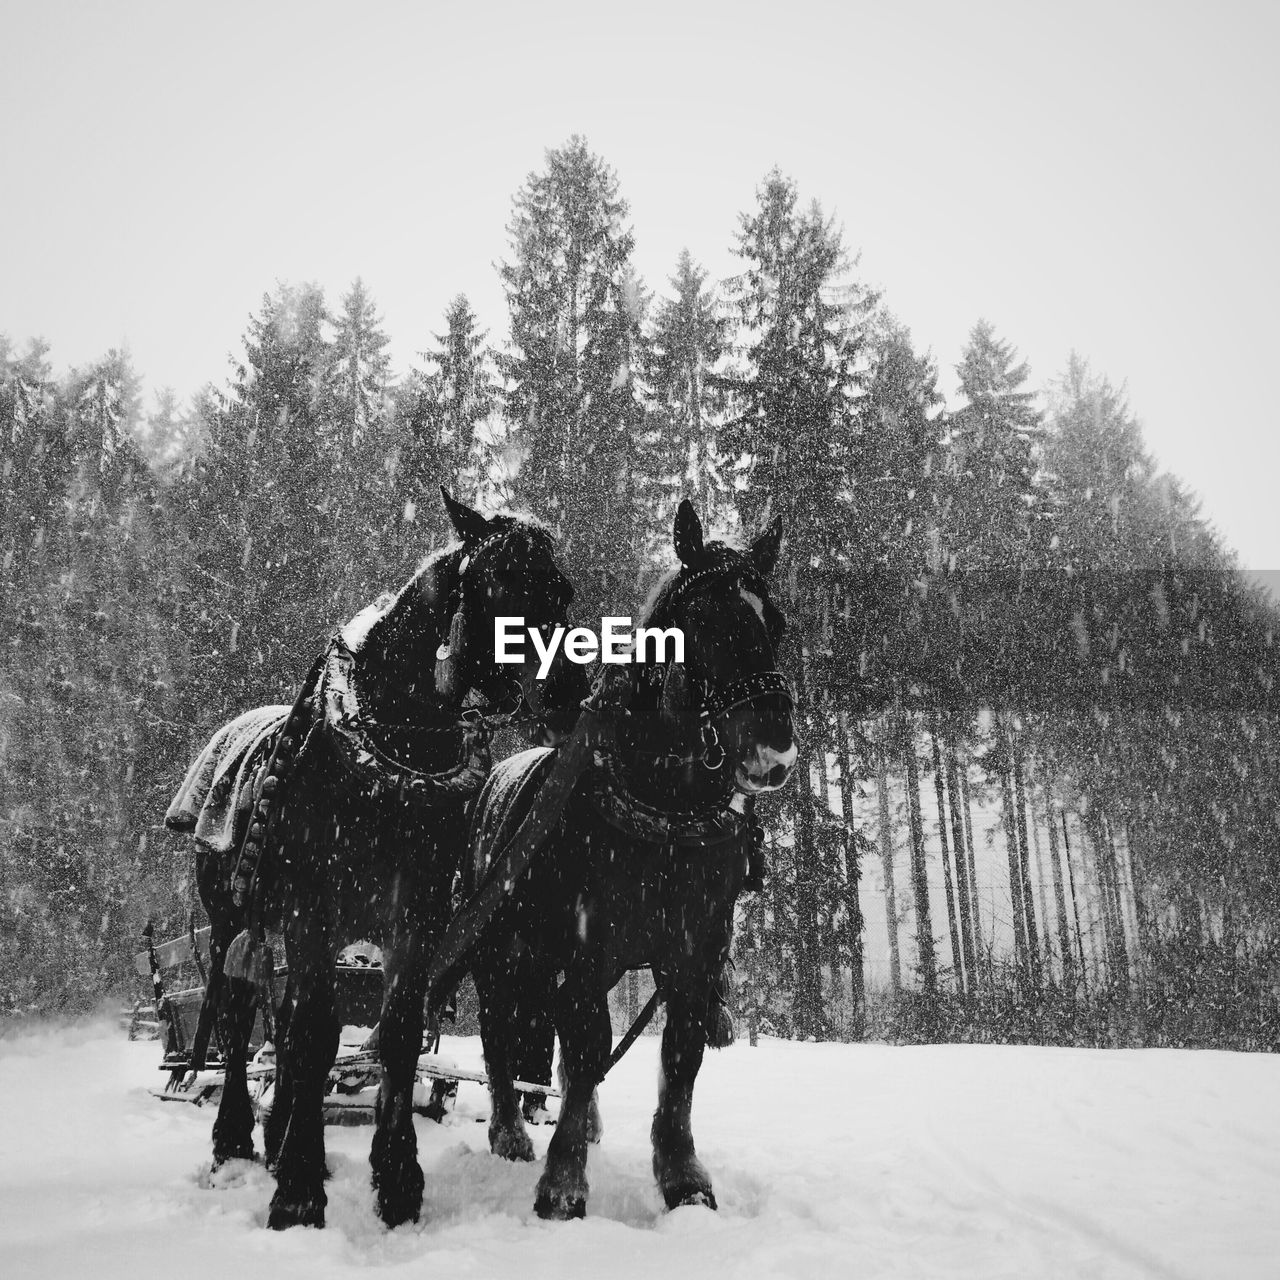 Horses on a snowy day